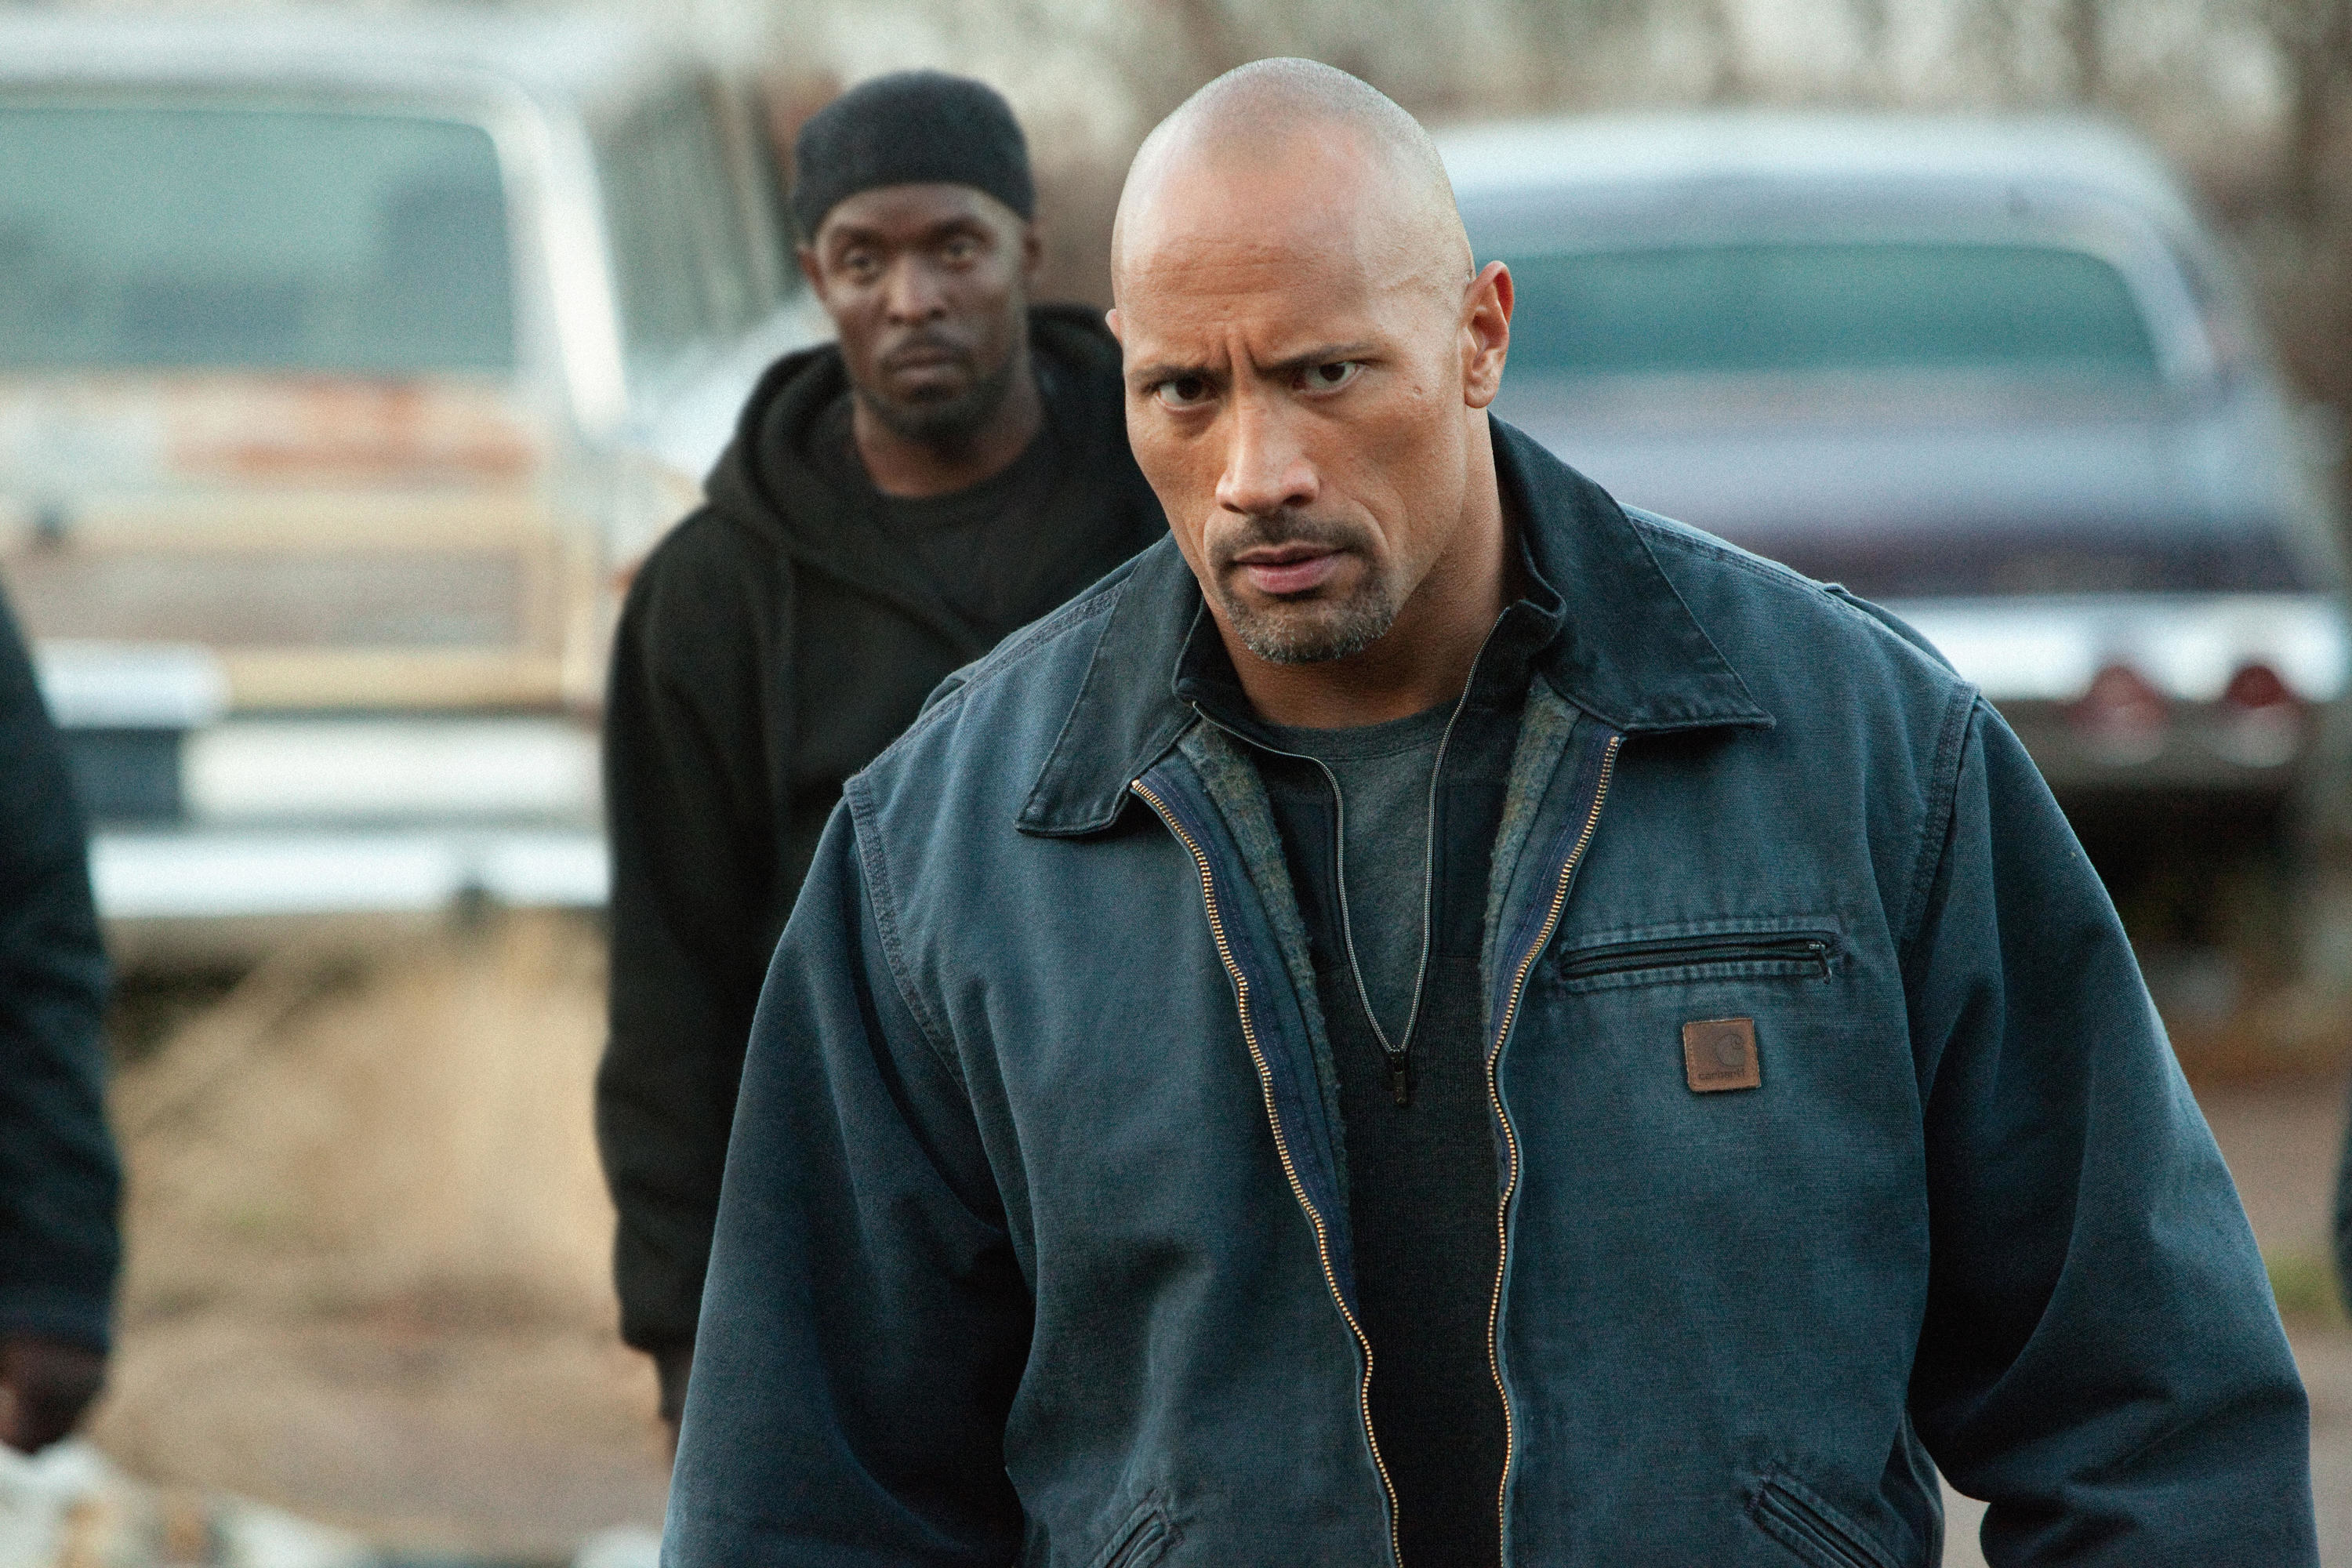 Dwayne Johnson storms off with Michael K. Williams shortly behind him